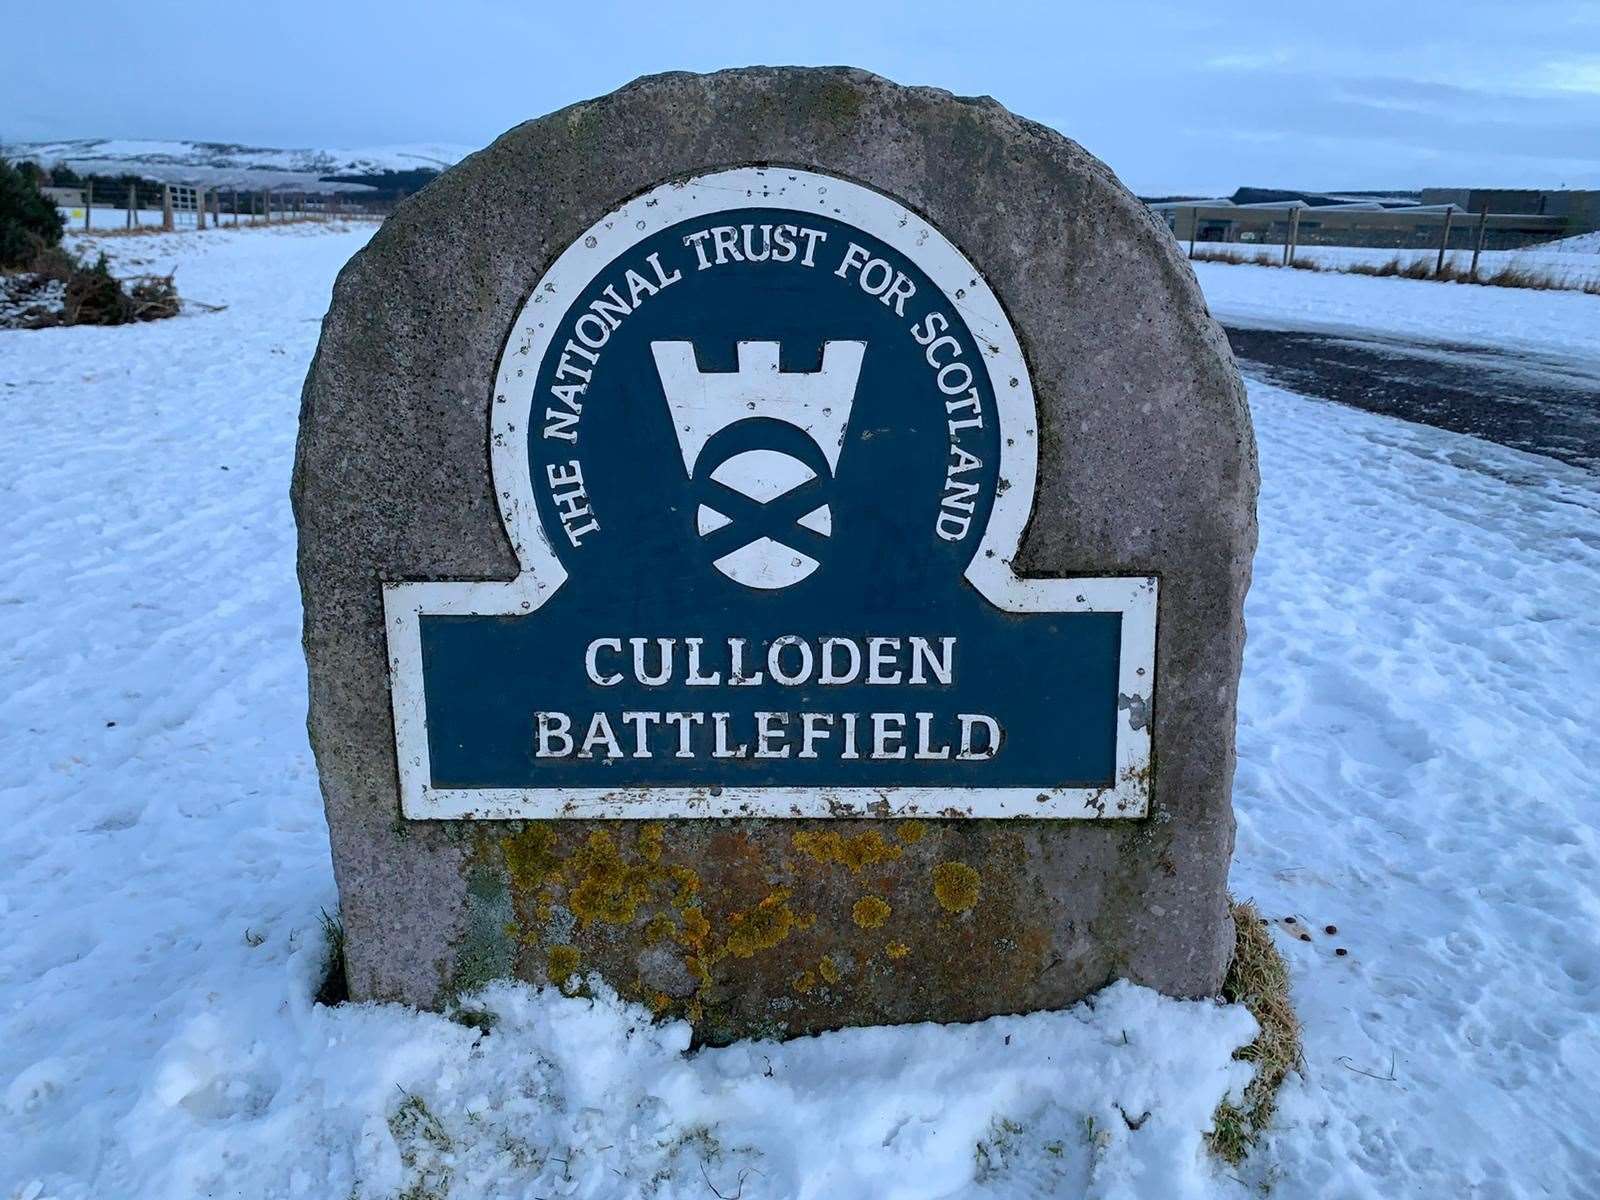 Campaigners are calling for greater protection of Culloden Battlefield.